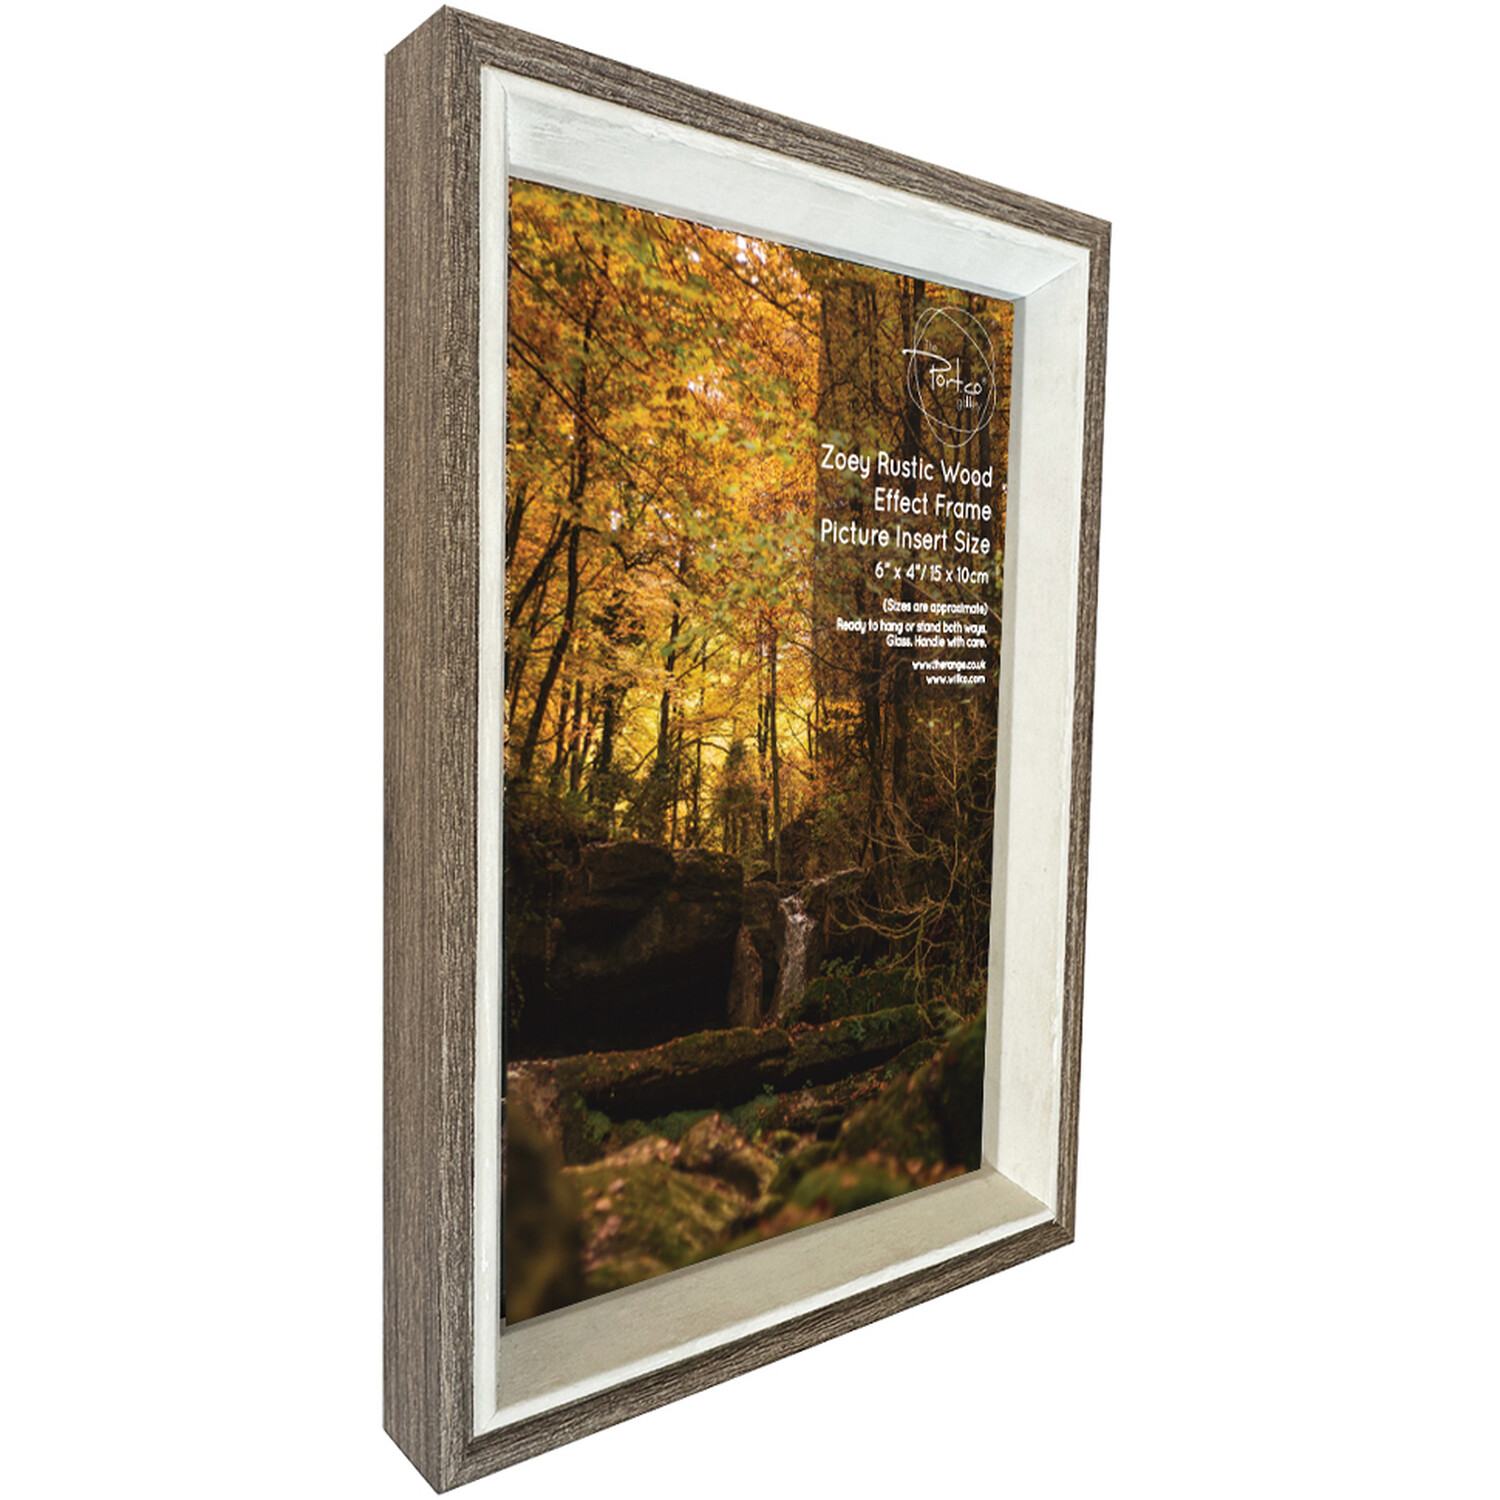 Zoey Rustic Wood Effect Frame - Brown / 6x4in Image 2